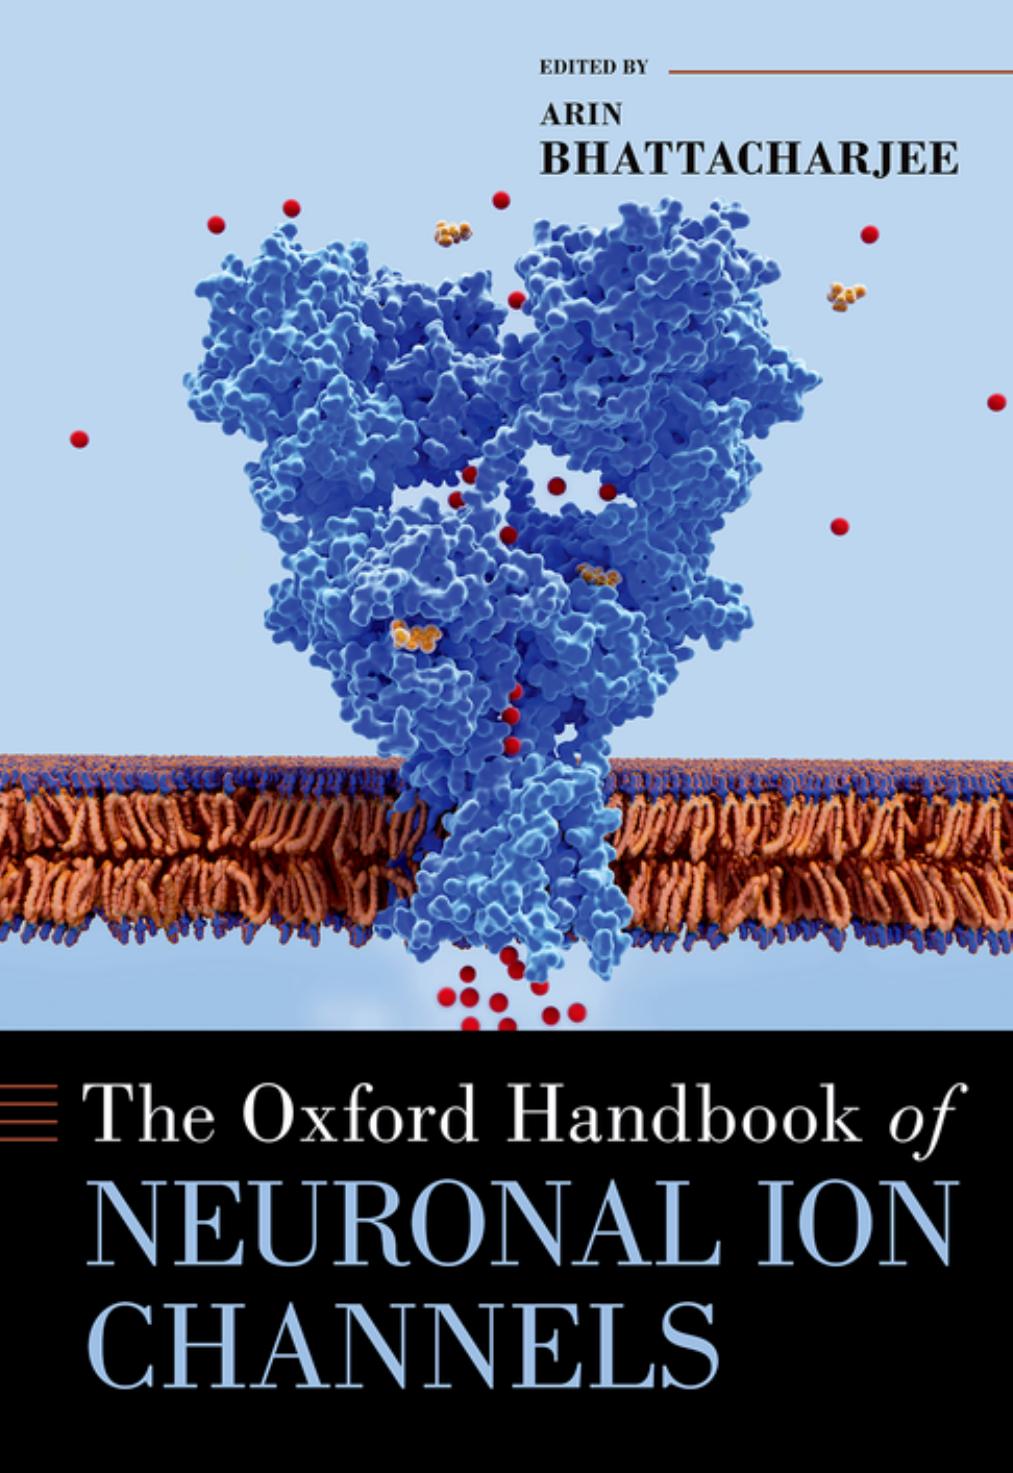 The Oxford Handbook of Neuronal Ion Channels by Arin Bhattacharjee